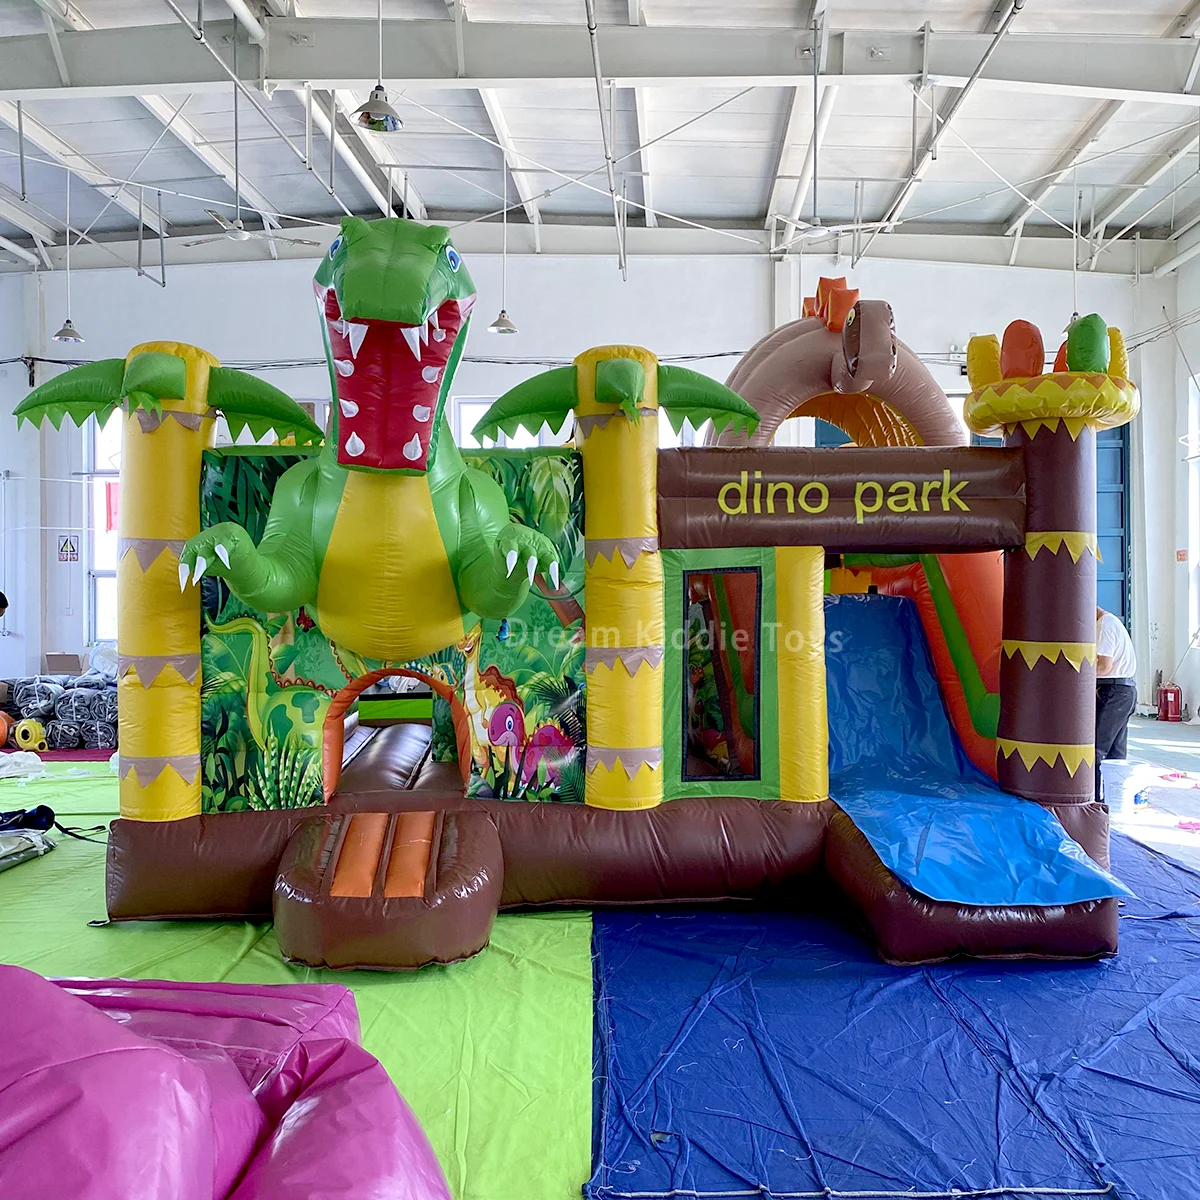 

Dino park inflatable combo jumping castle with slide for kids birthday dinosaur inflatable bounce house for party rental